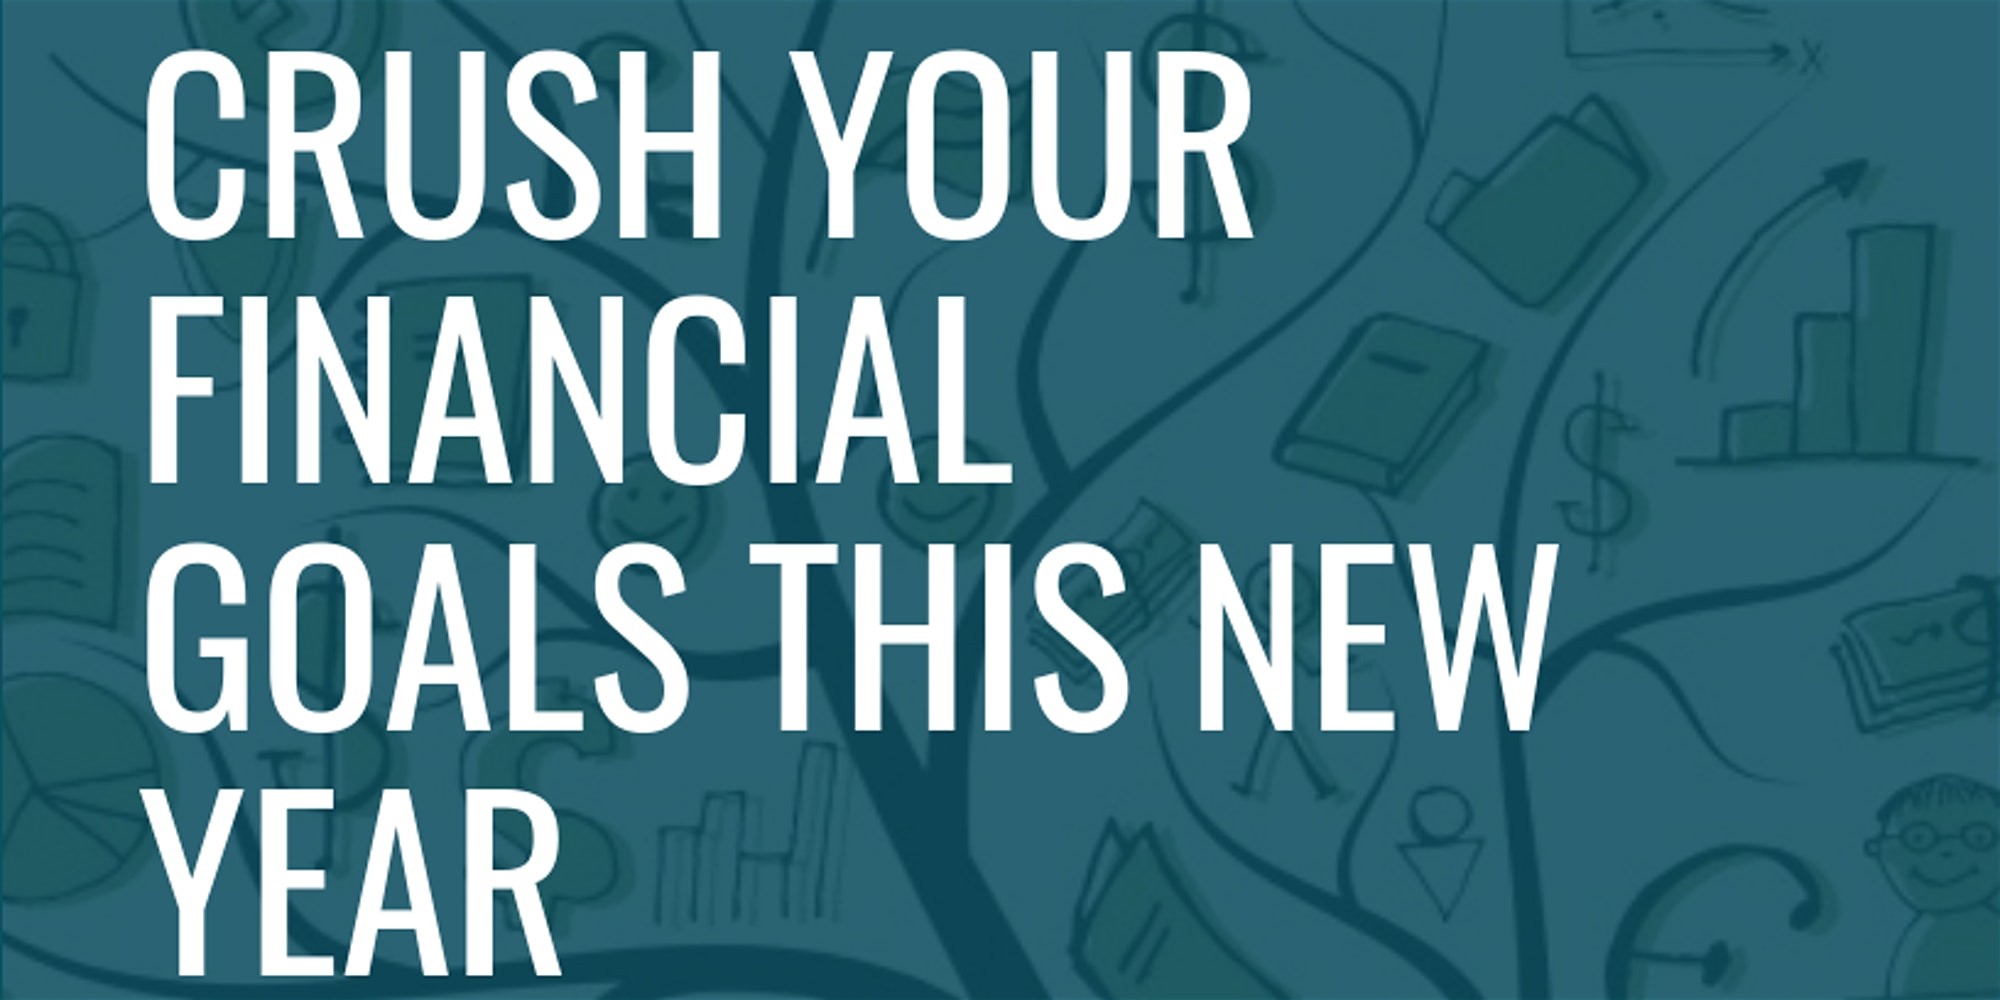 CRUSH YOUR FINANCIAL GOALS IN 2020 - WORKSHOP AND NETWORKING